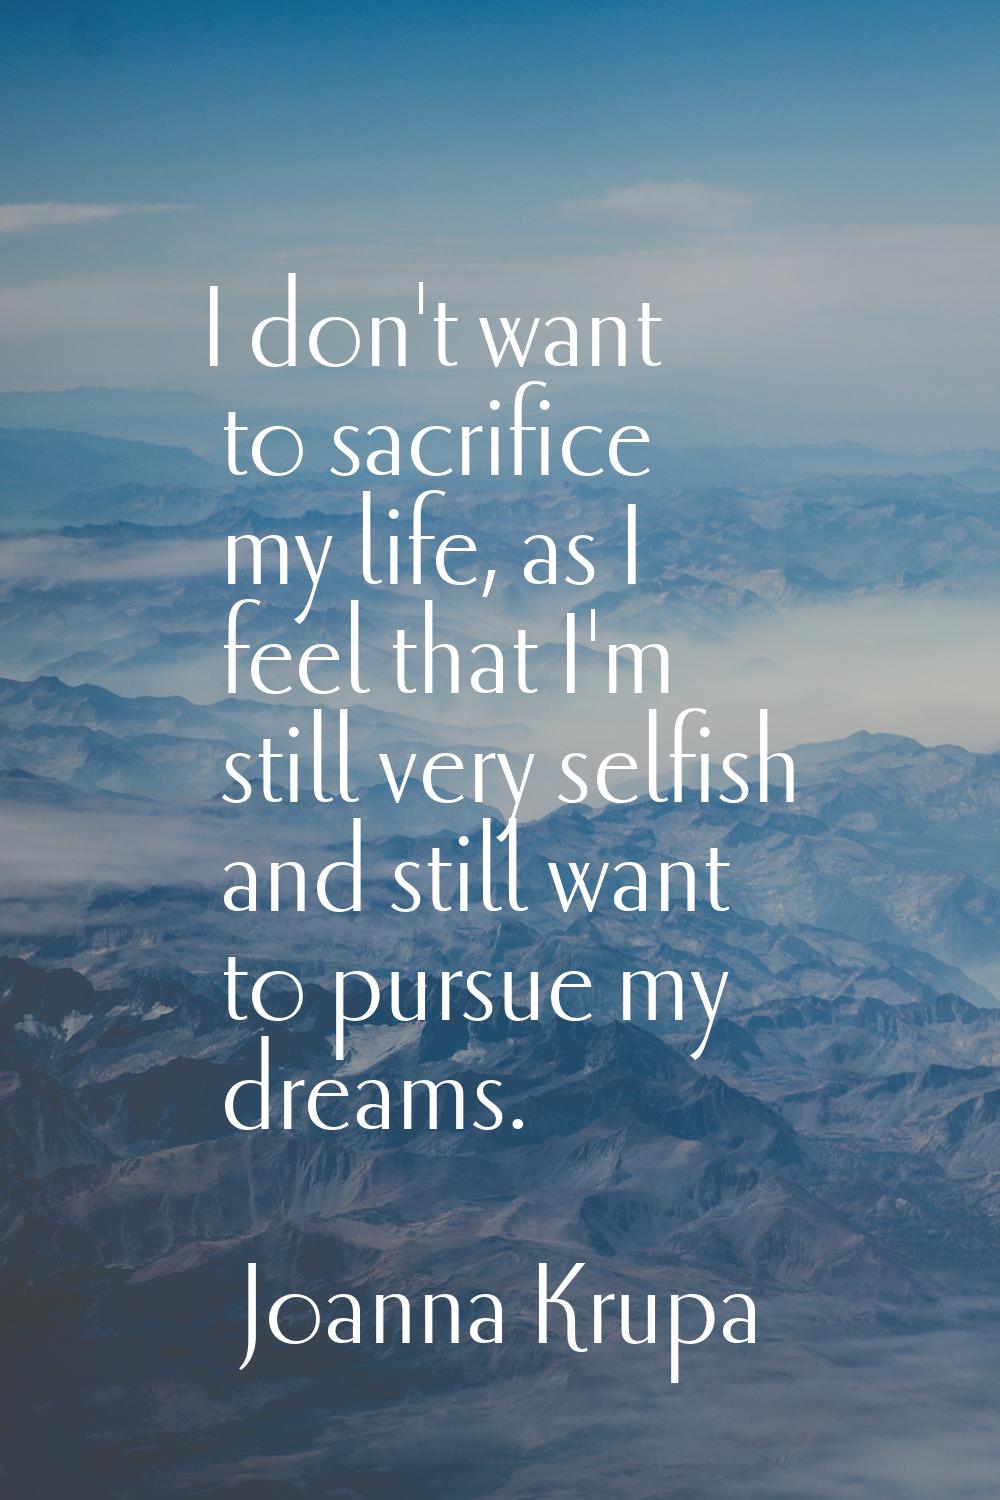 I don't want to sacrifice my life, as I feel that I'm still very selfish and still want to pursue m